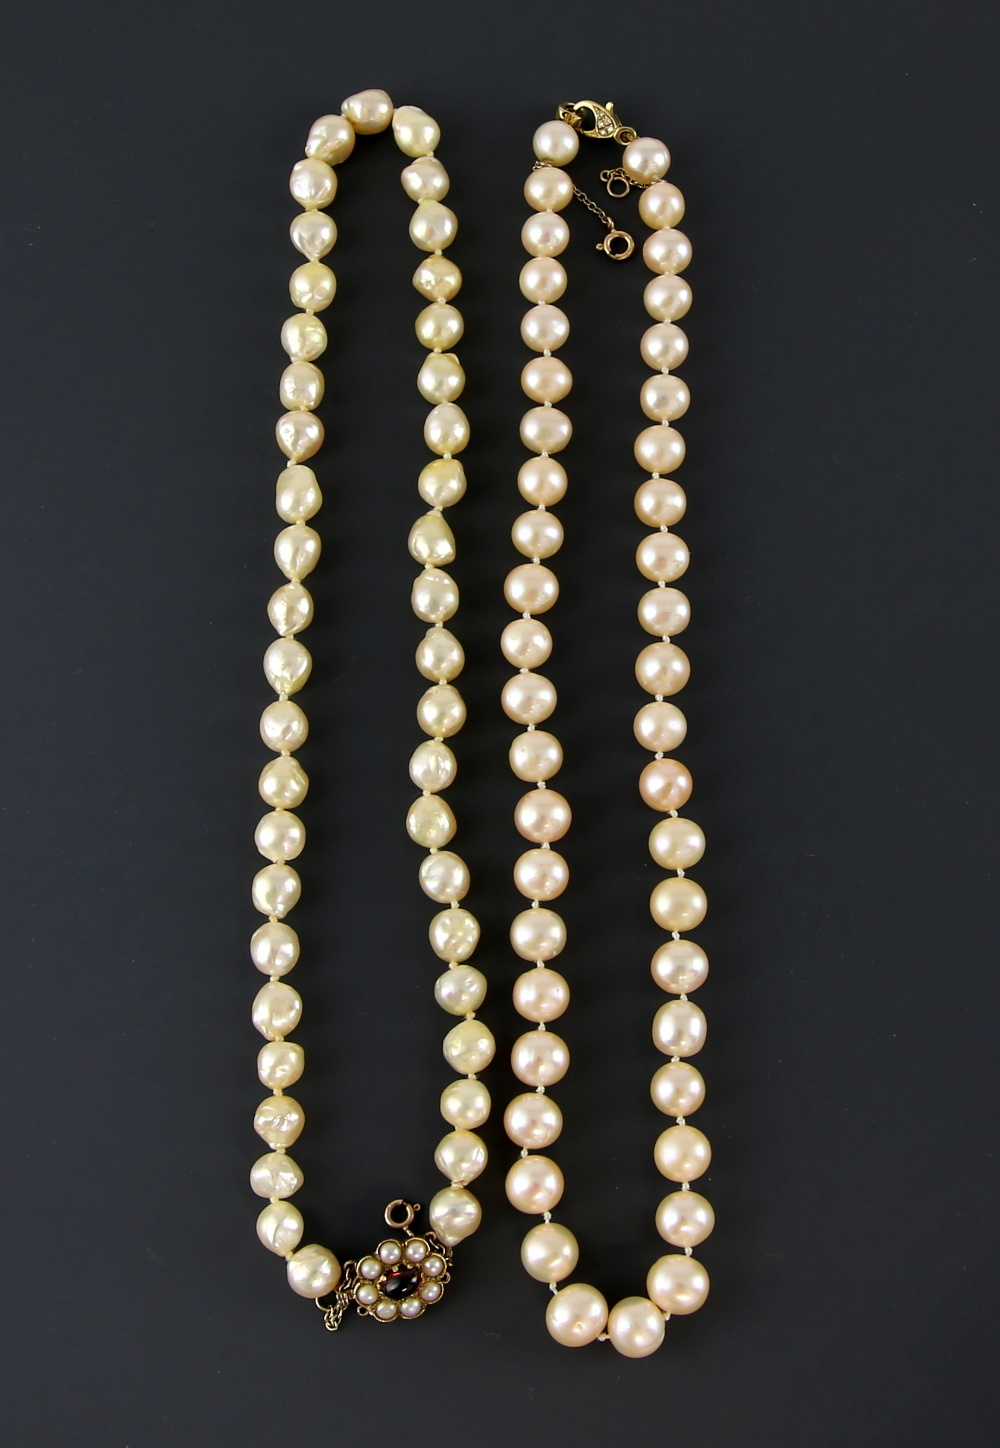 Cultured pearl necklace, with oval peach coloured pearls, measuring 9mm in diameter, strung with